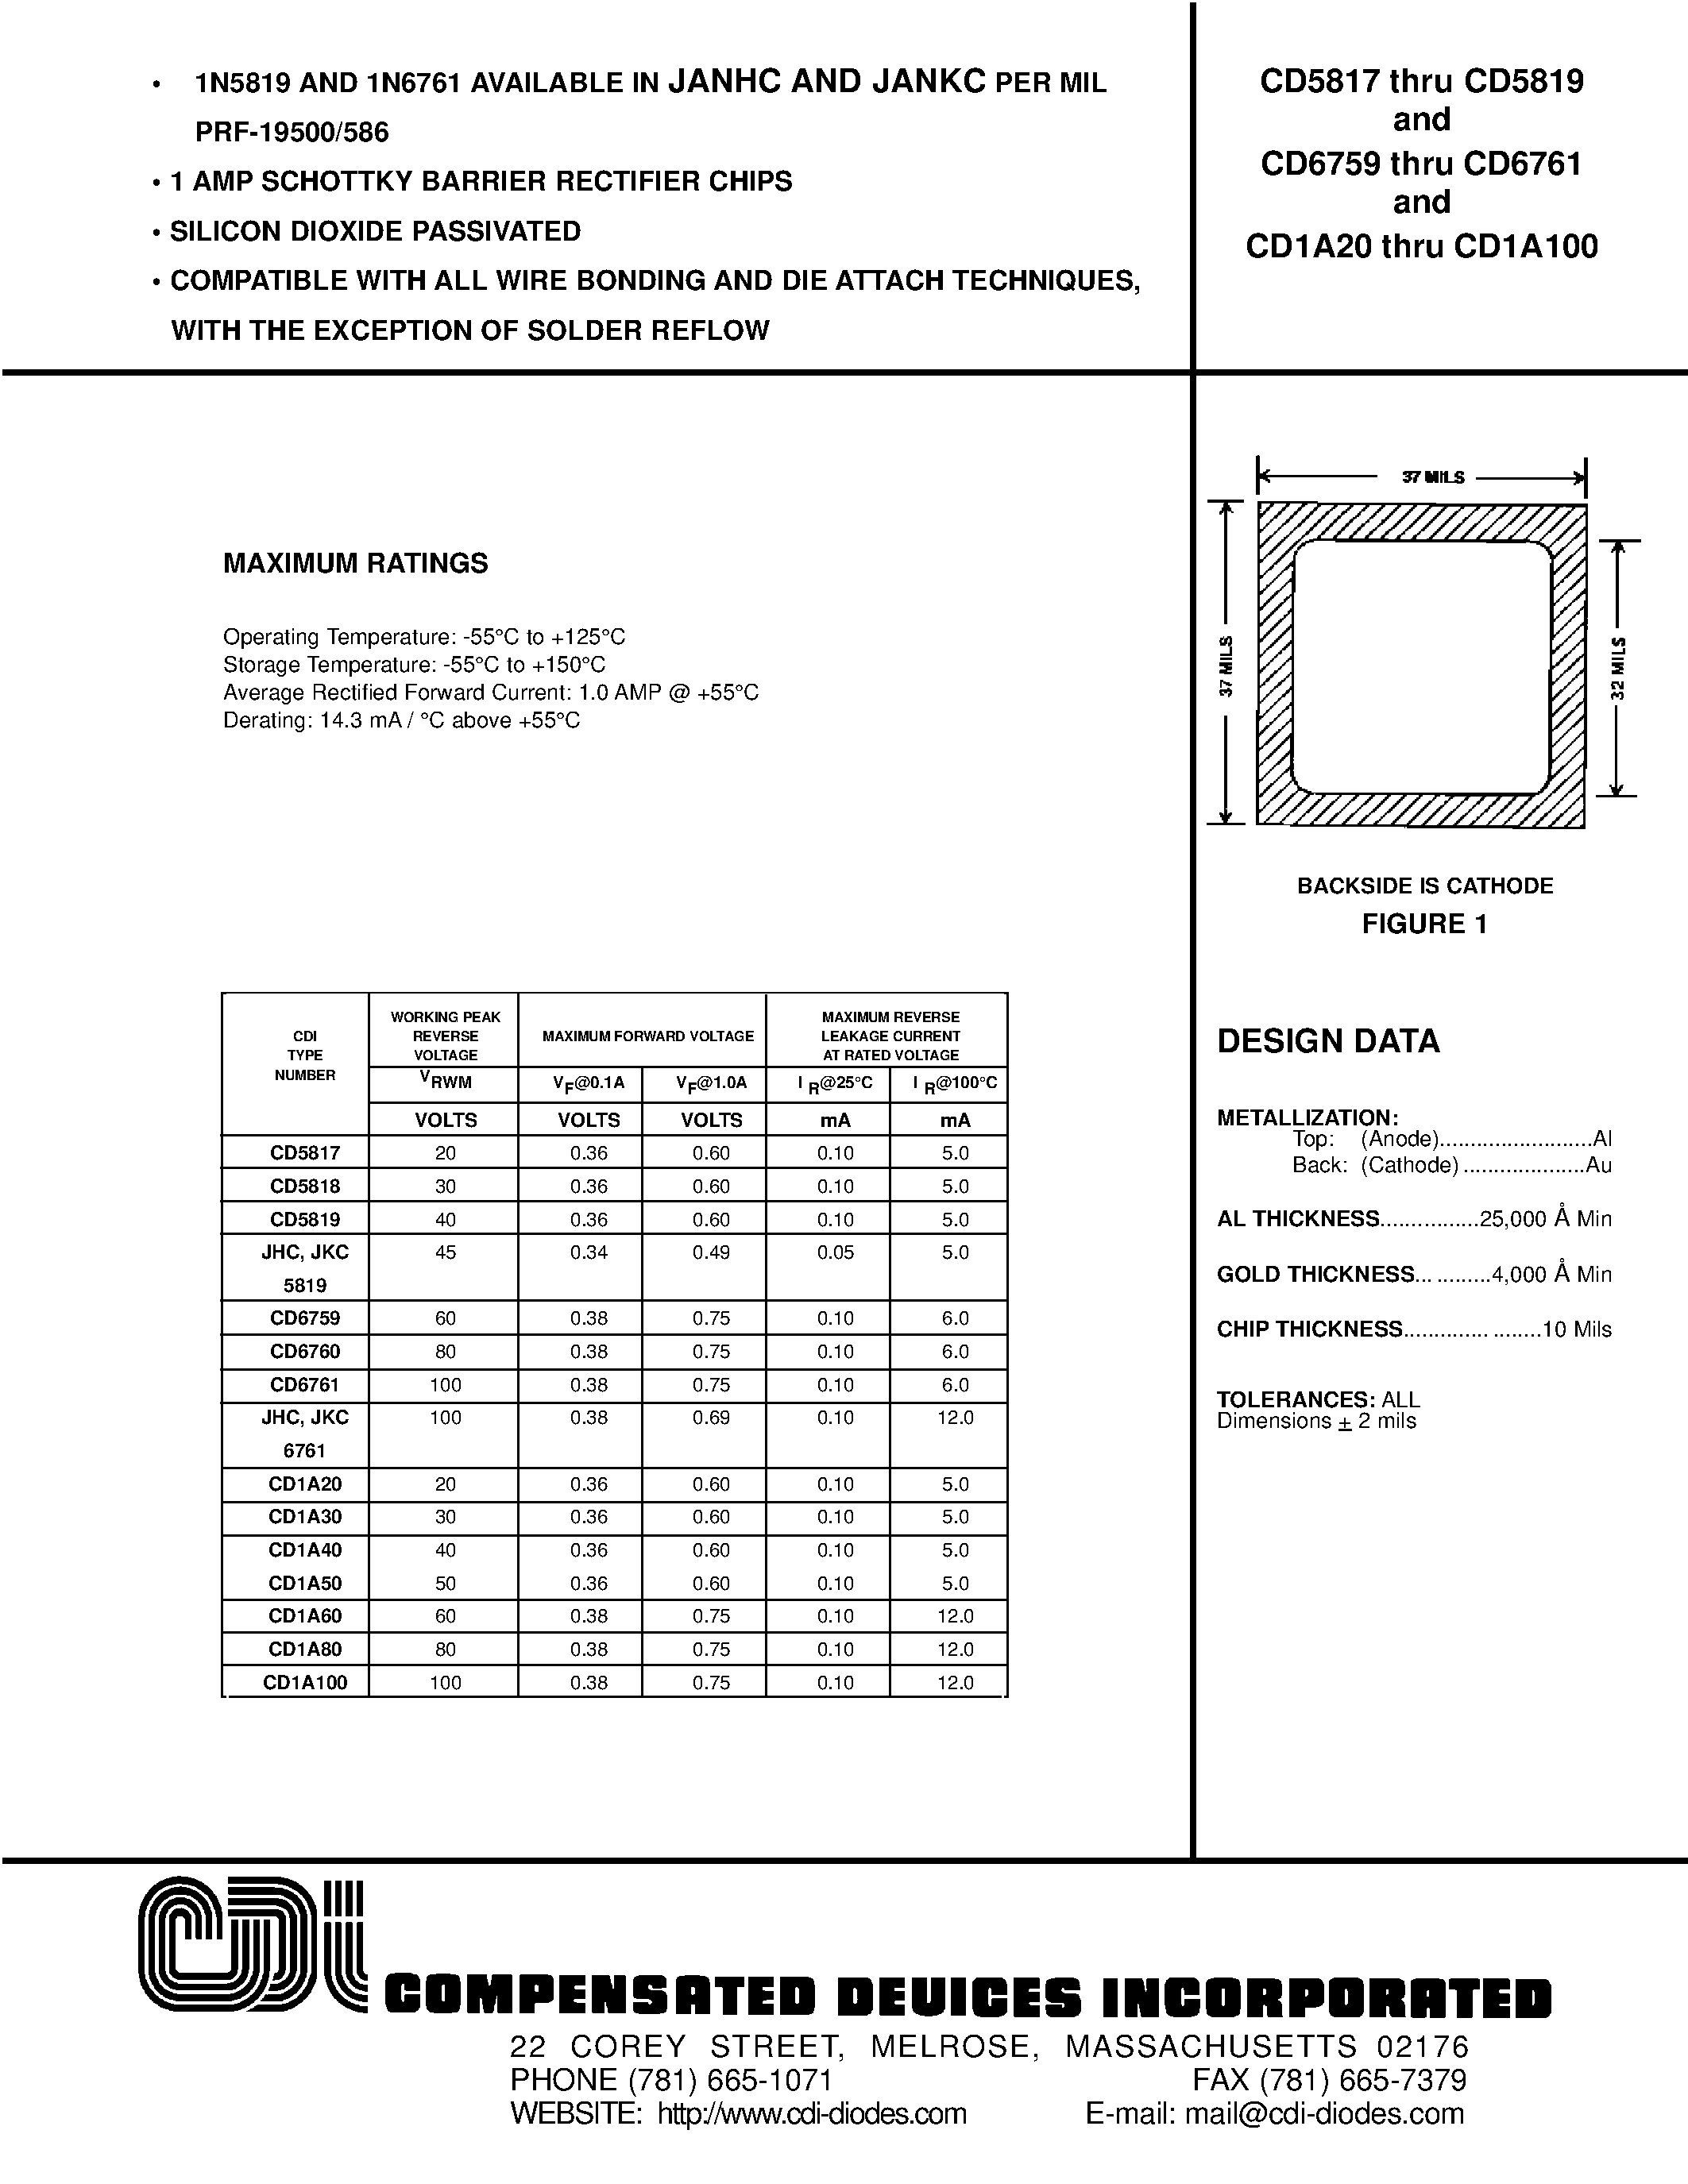 Datasheet CD1A40 - 1 AMP SCHOTTKY BARRIER RECTIFIER CHIPS page 1